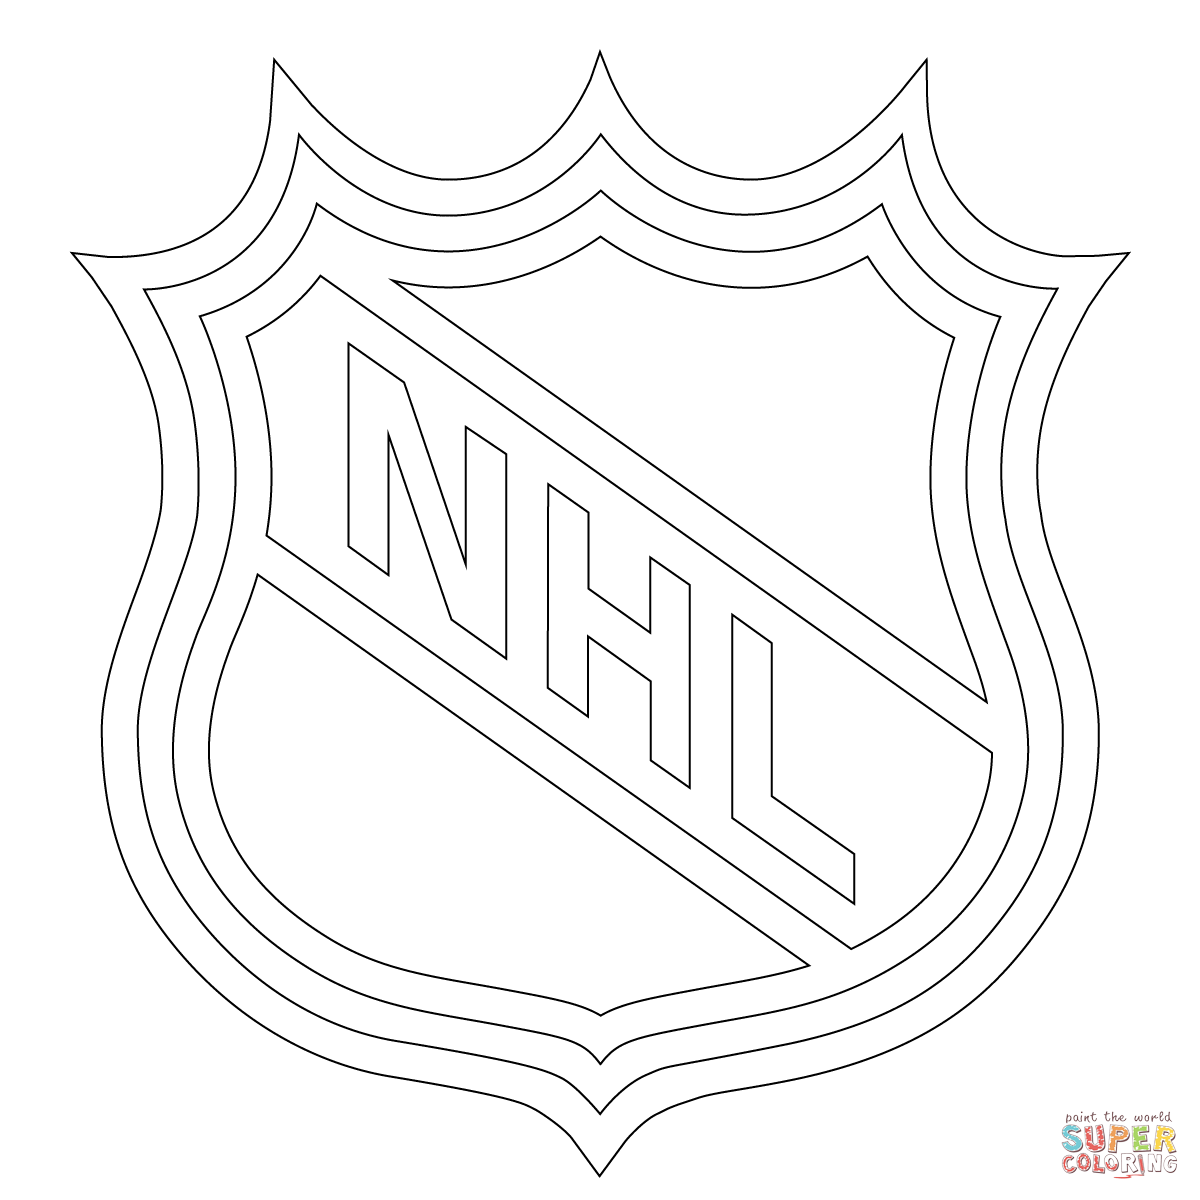 Sports coloring pages, Nhl logos, Nhl